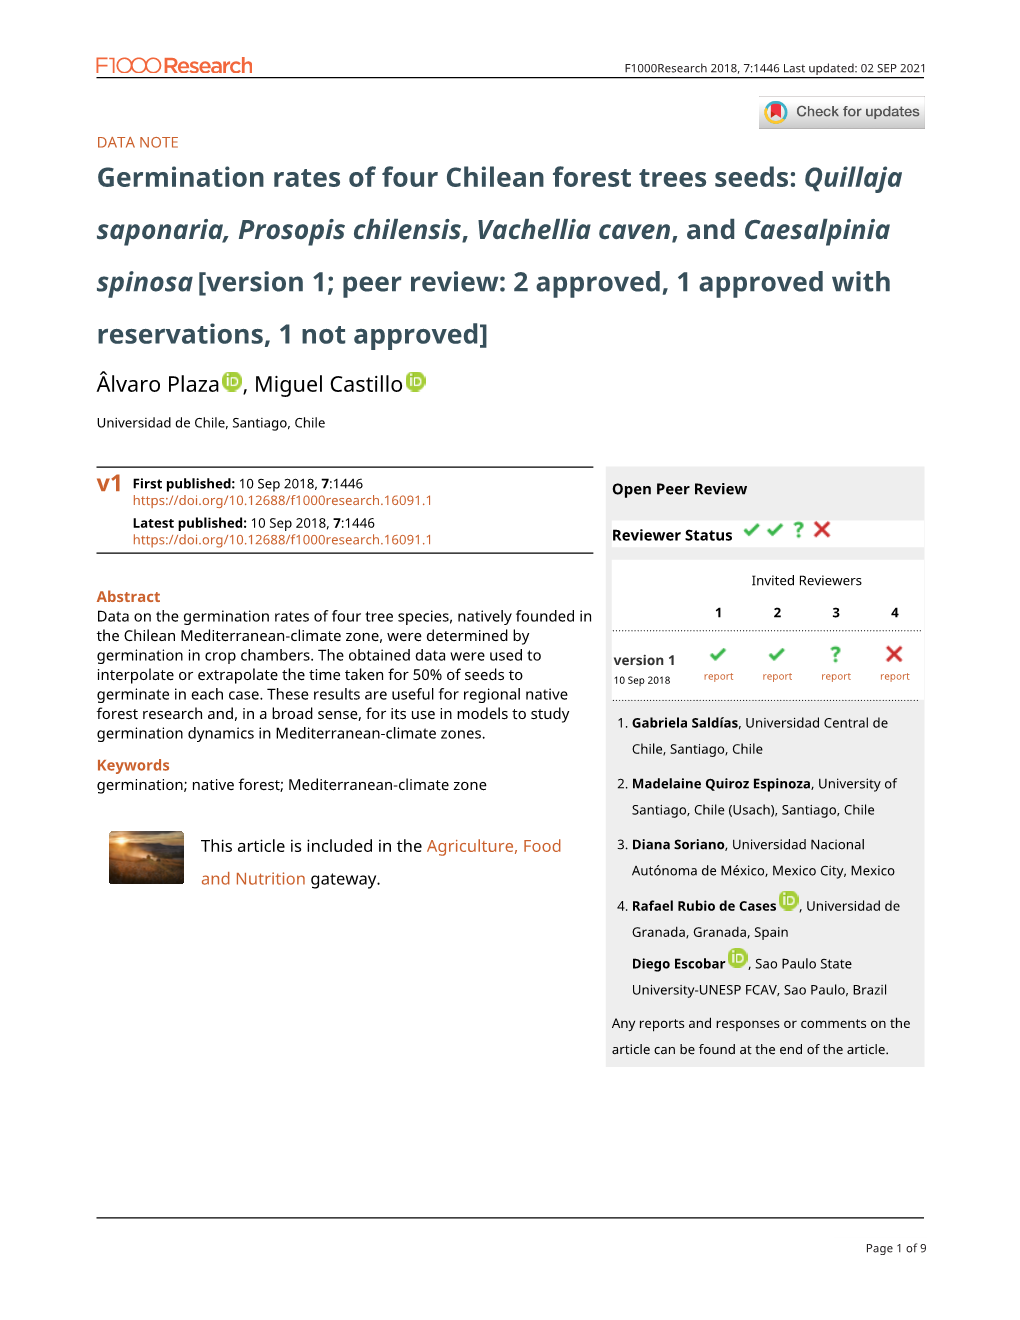 Germination Rates of Four Chilean Forest Trees Seeds